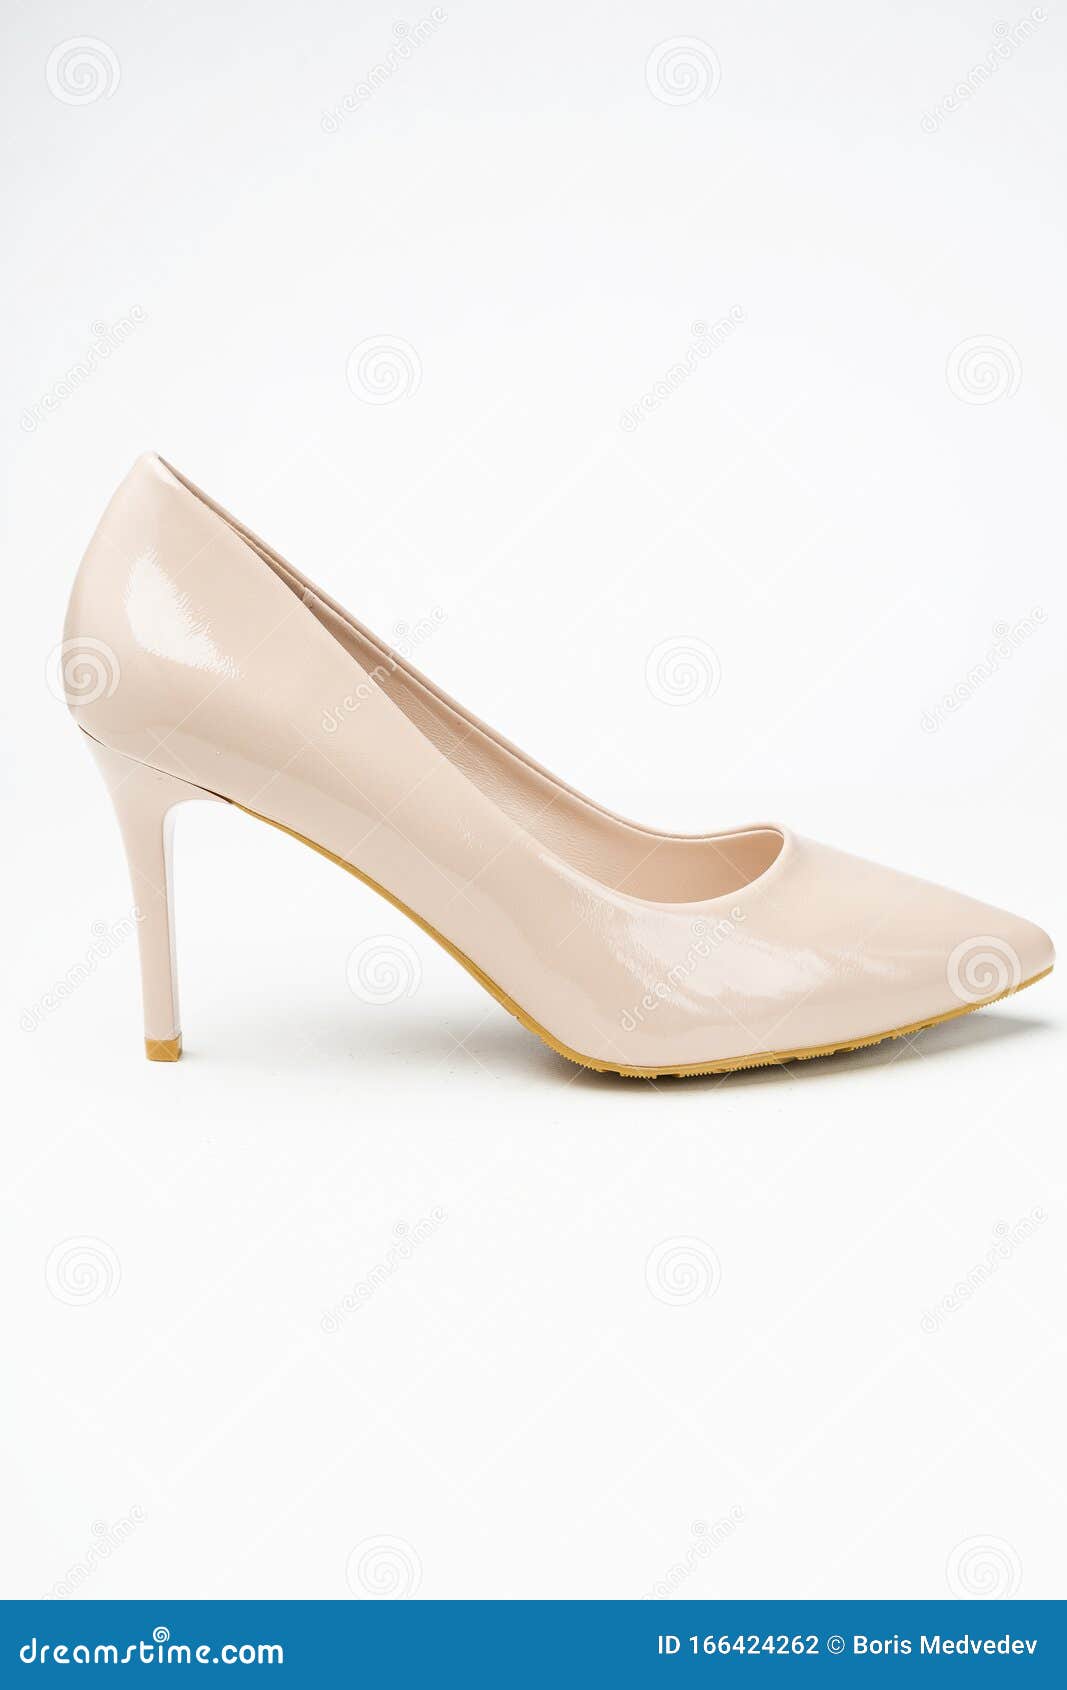 Women`s Patent High Heel Shoes Beige Color Stock Photo - Image of ...